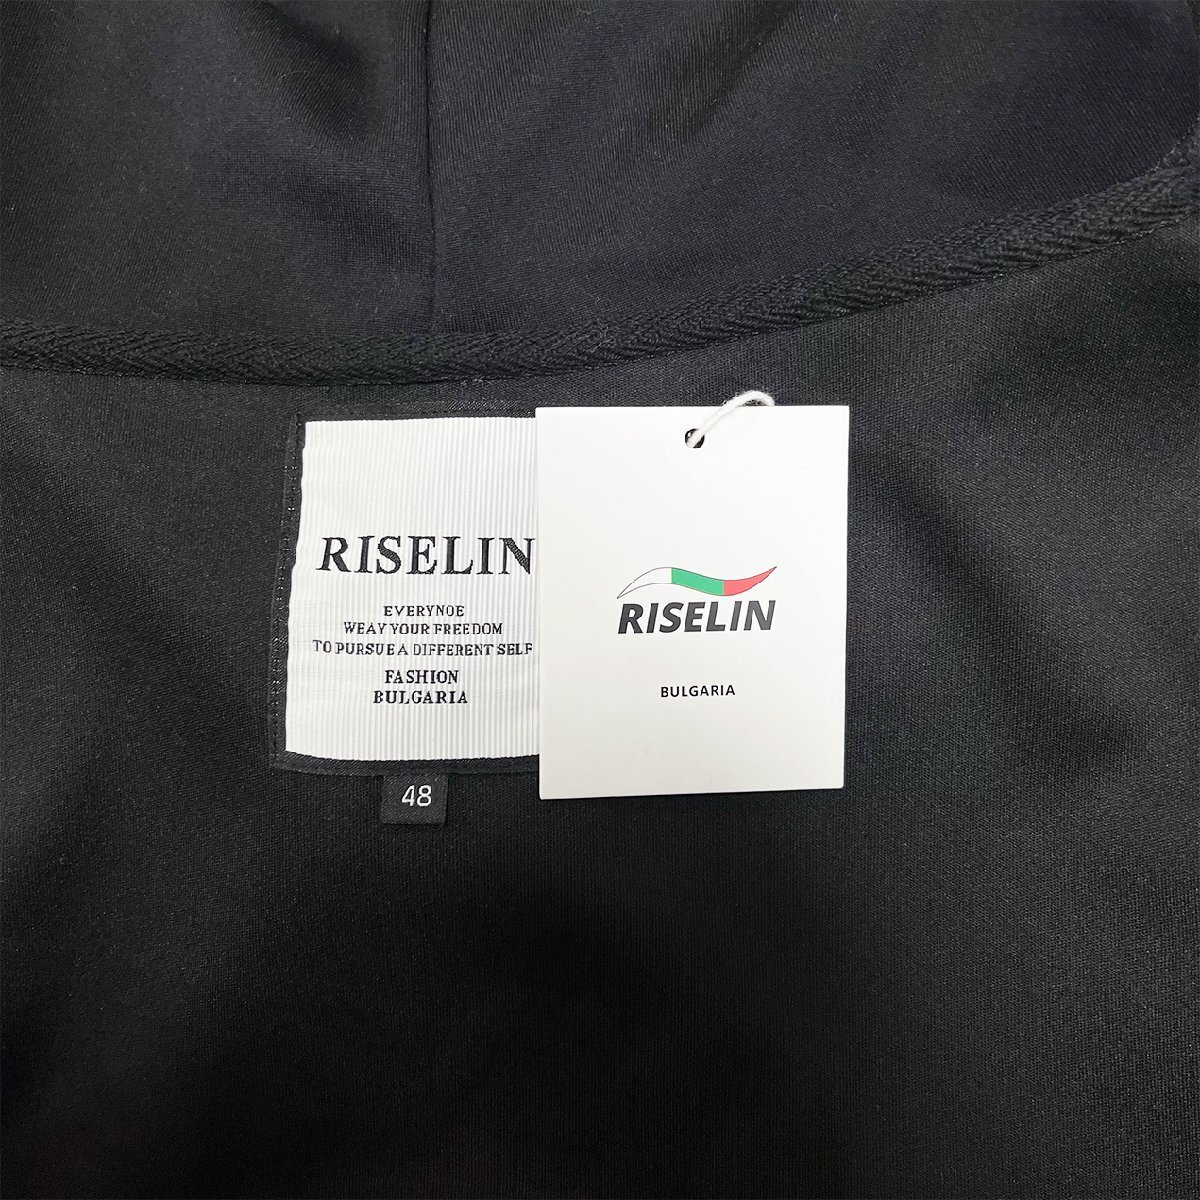  new work Europe made * regular price 4 ten thousand * BVLGARY a departure *RISELIN Parker on goods comfortable easy piece . tops sweat pull over popular M/46